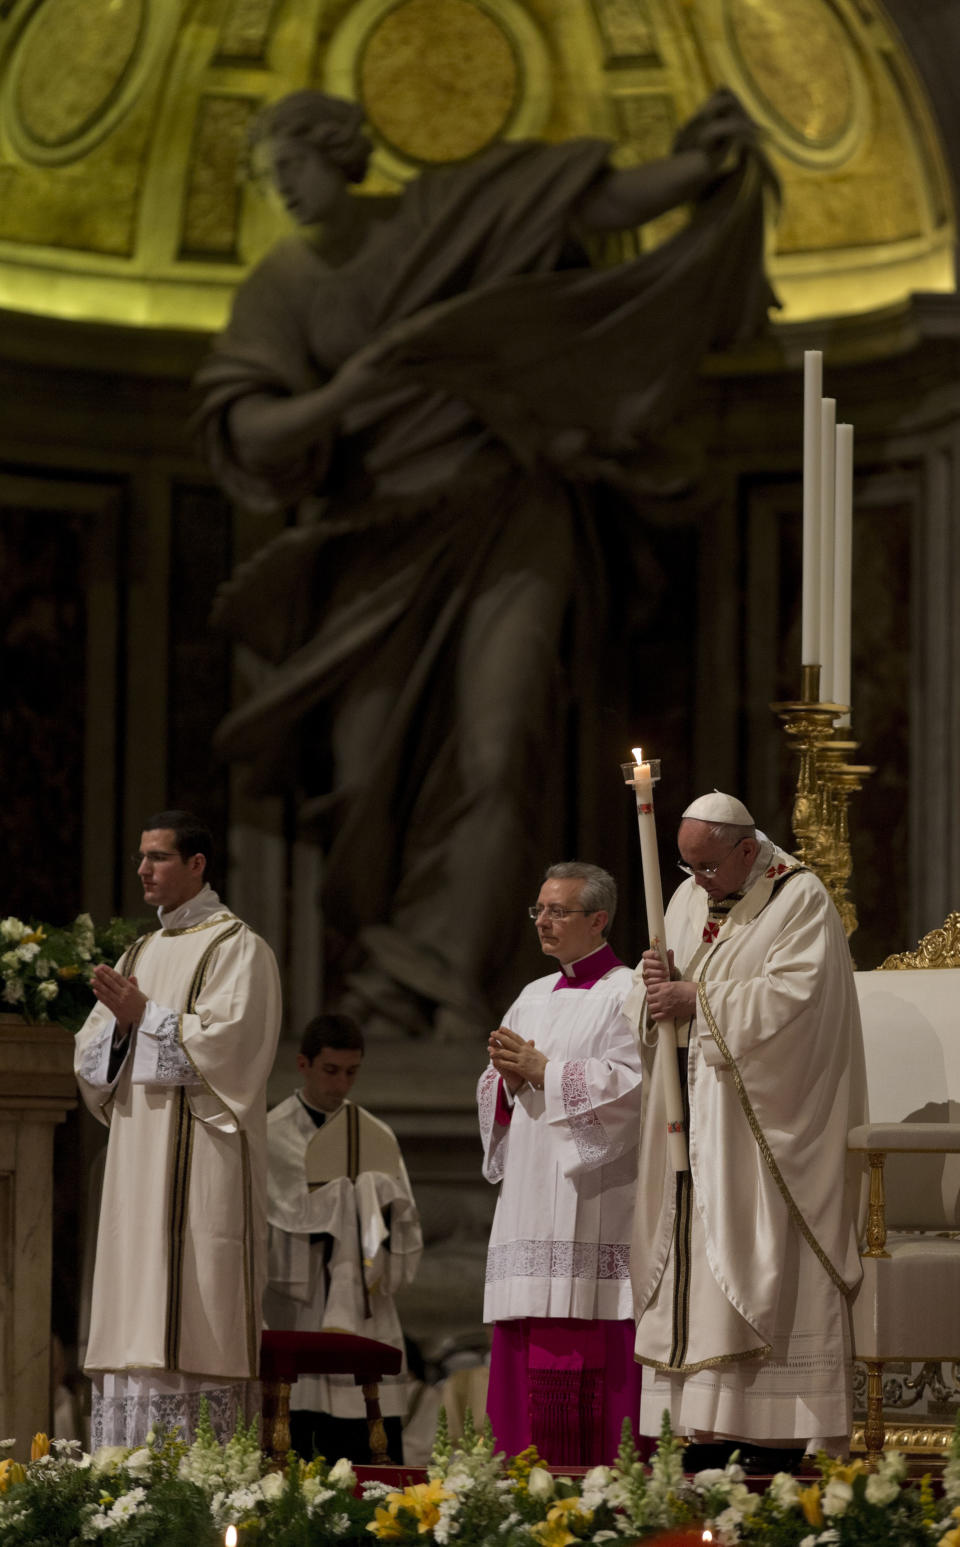 Pope Francis holding a tall, lit, white candle, enters St. Peter's Basilica to begin the Easter vigil service, at the Vatican, Saturday, April 19, 2014. (AP Photo/Alessandra Tarantino)